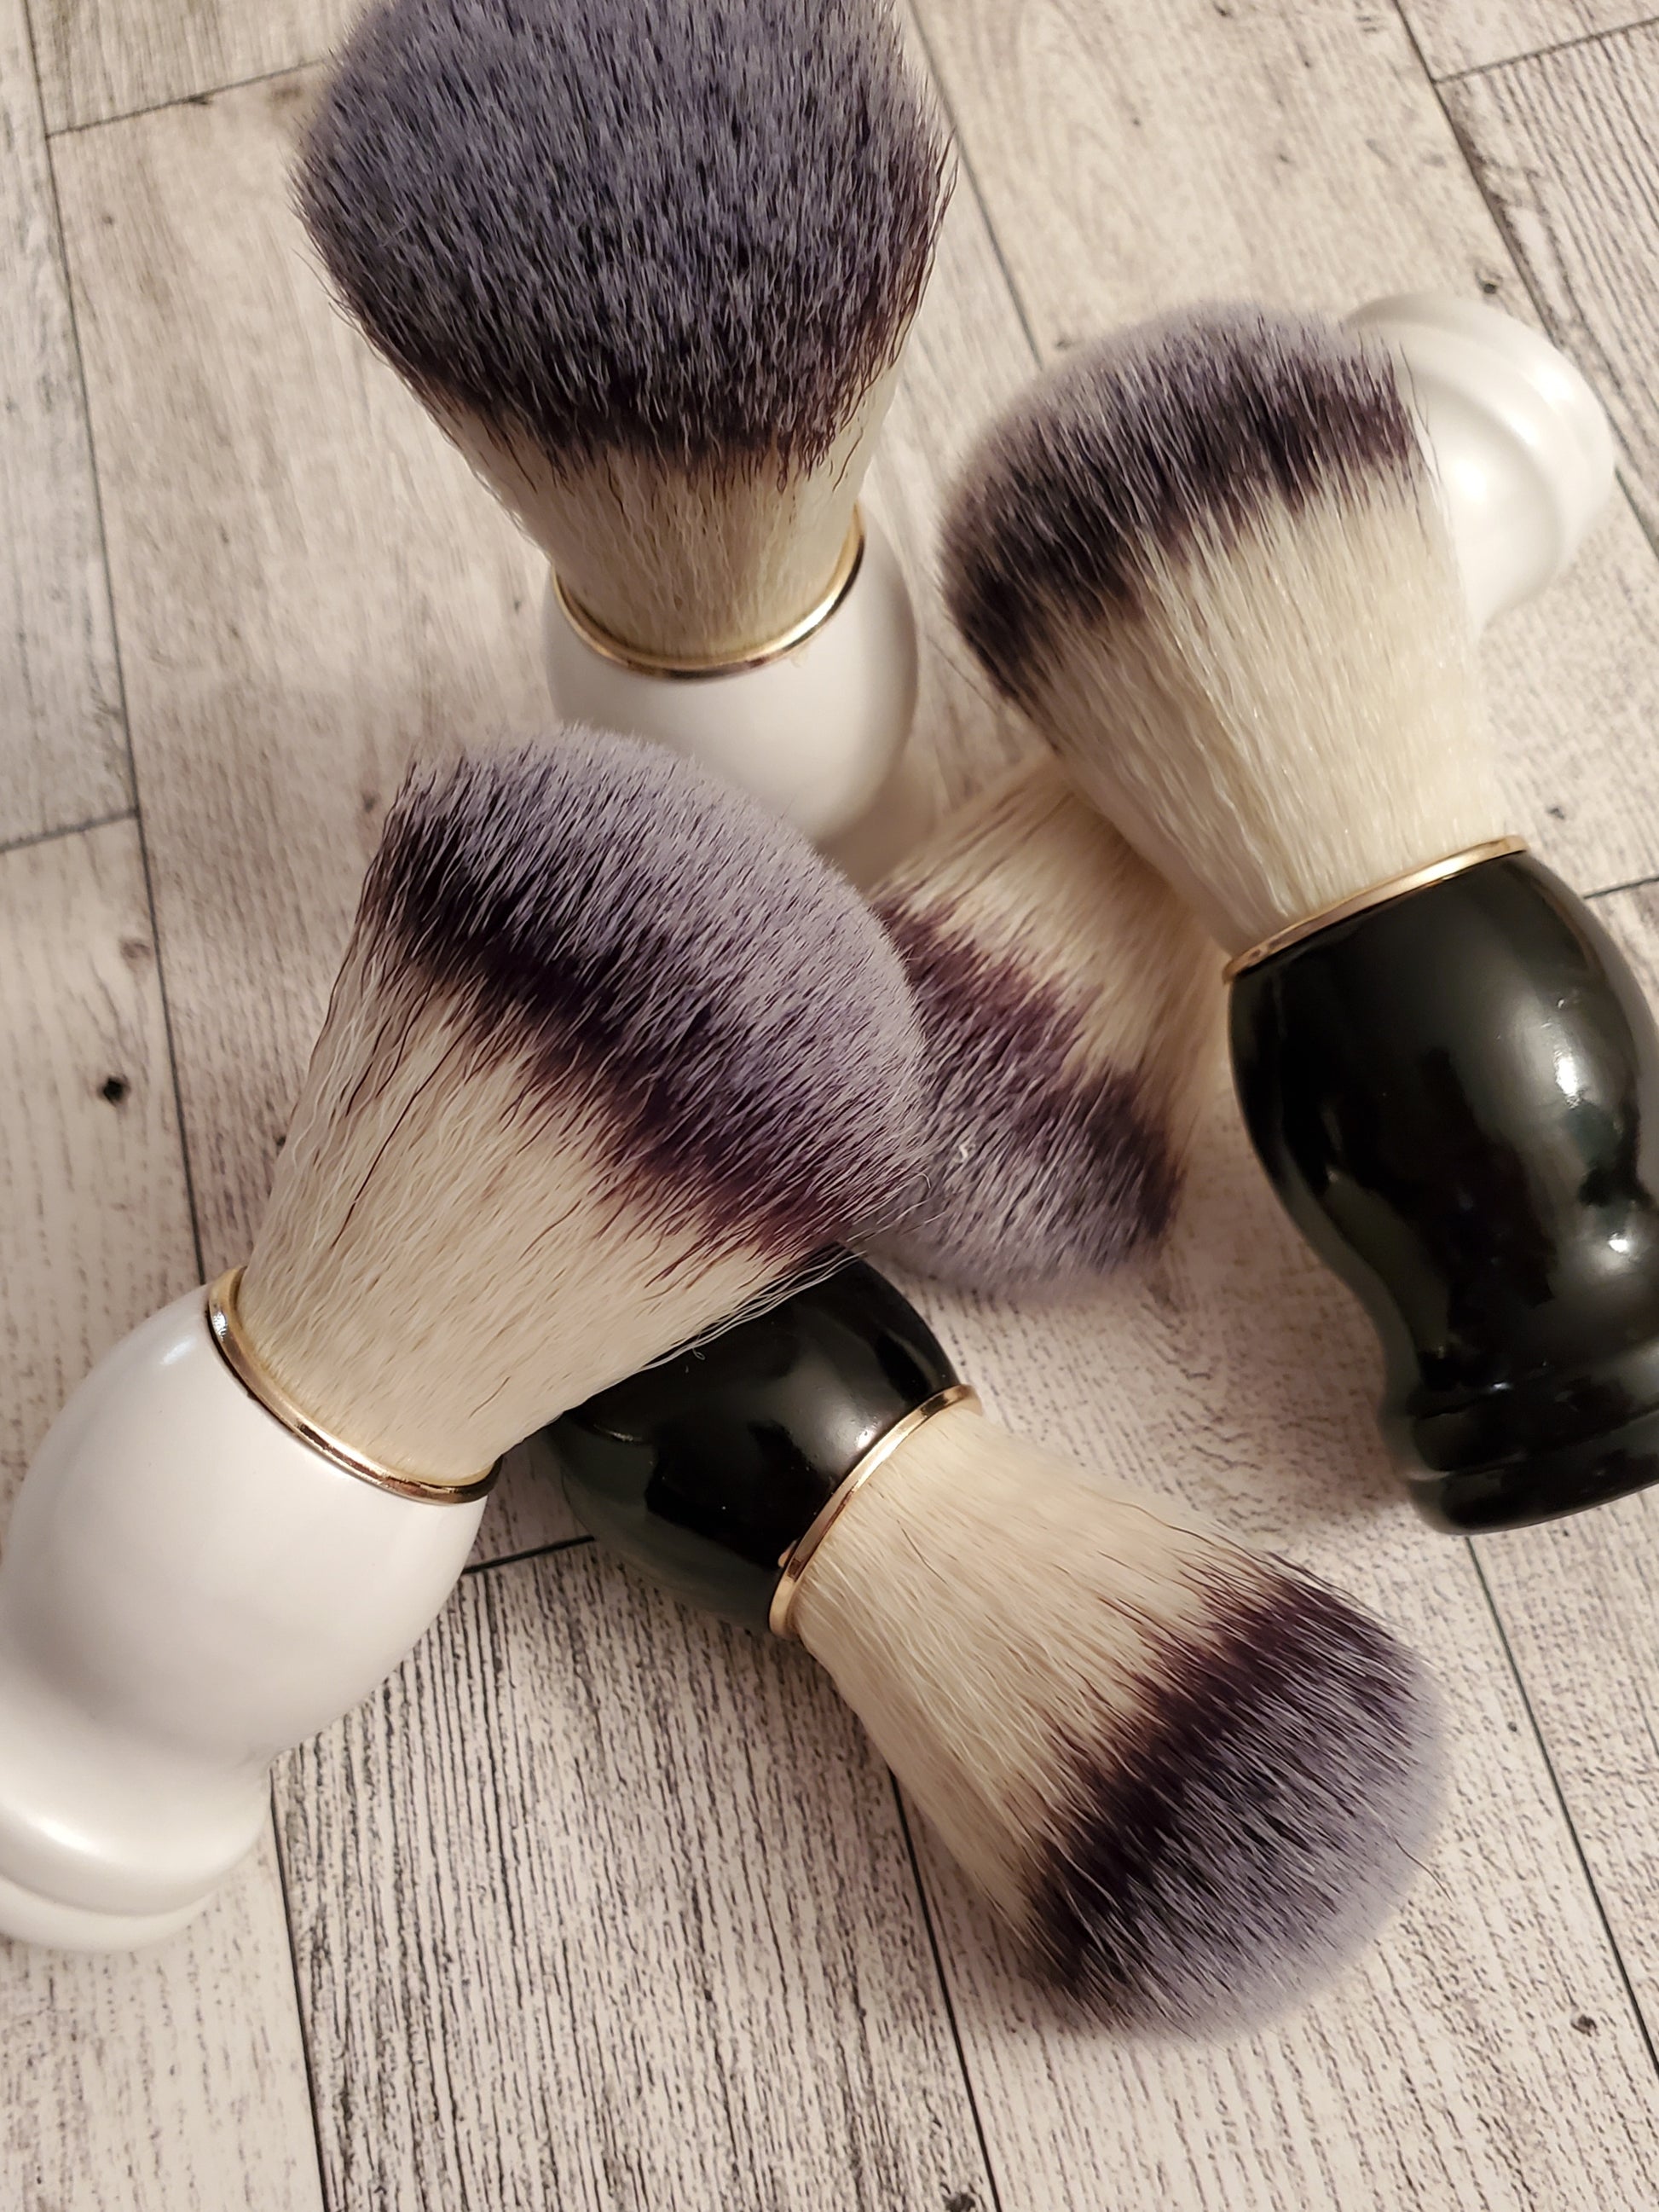 Shave Brushes, black and white handles, together.   